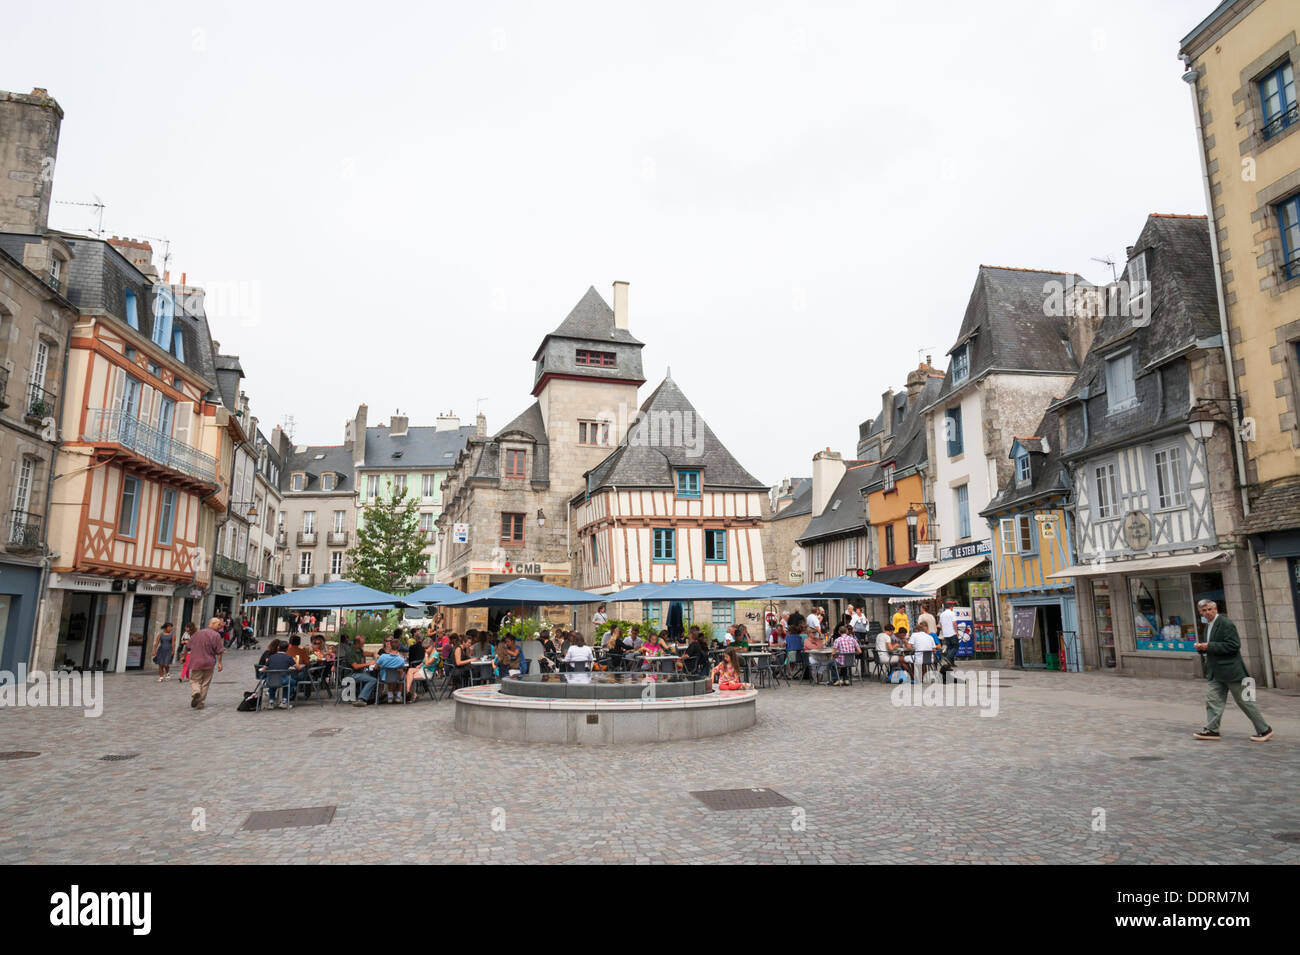 Half timbered old buildings in a square in Quimper Brittany France with dining tables outside. Stock Photo